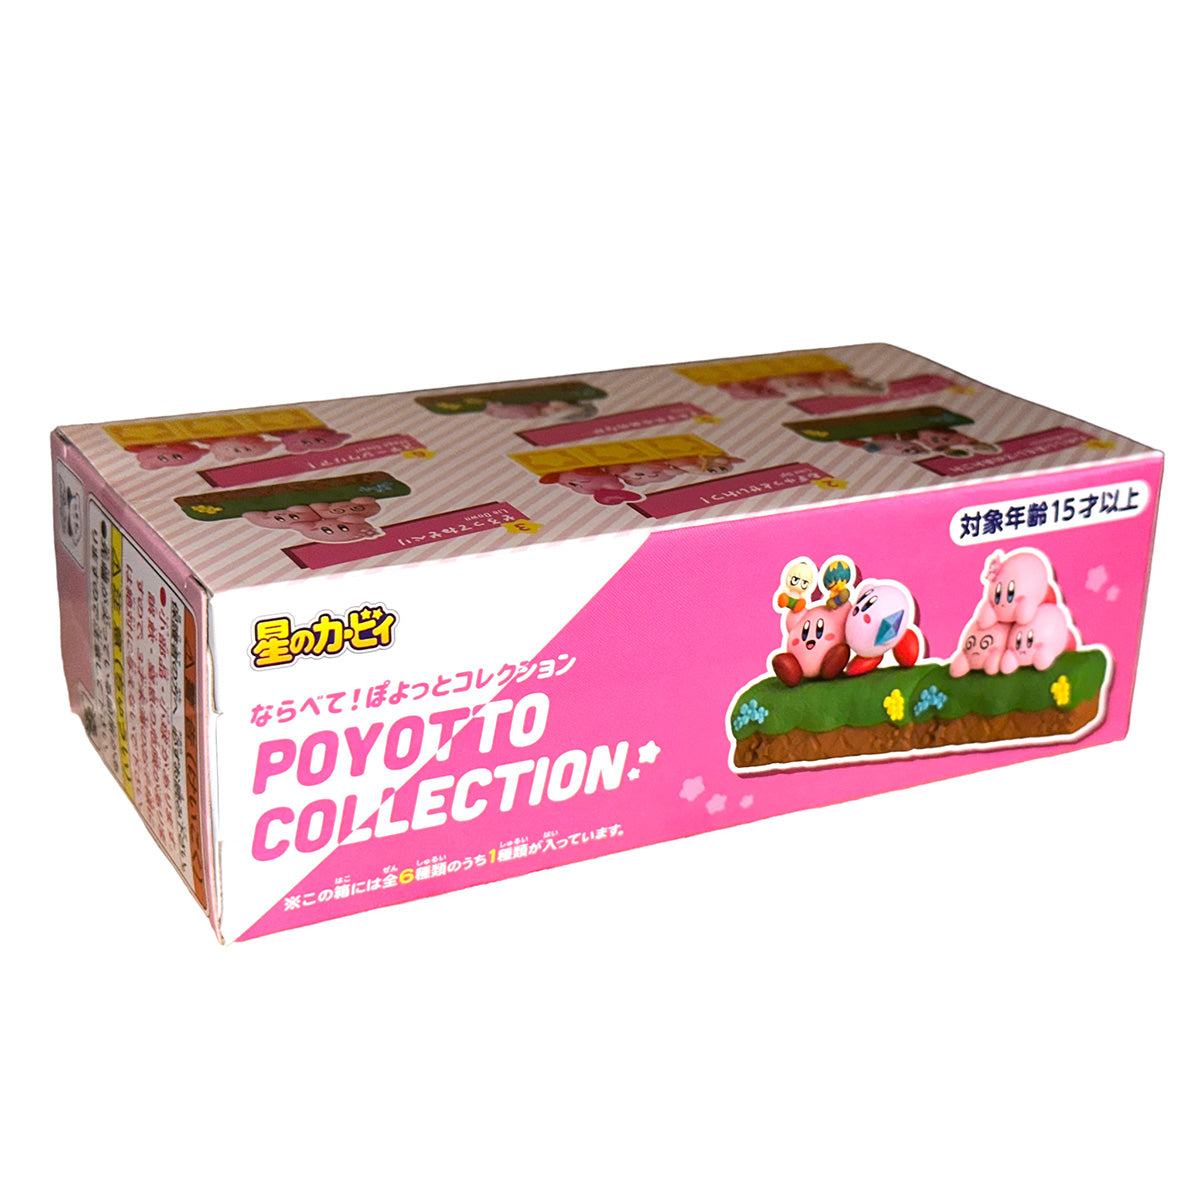 EAT - Kirby 30th Anniversary Poyotto Collection RE-MENT Figure #4 USA SHIP!